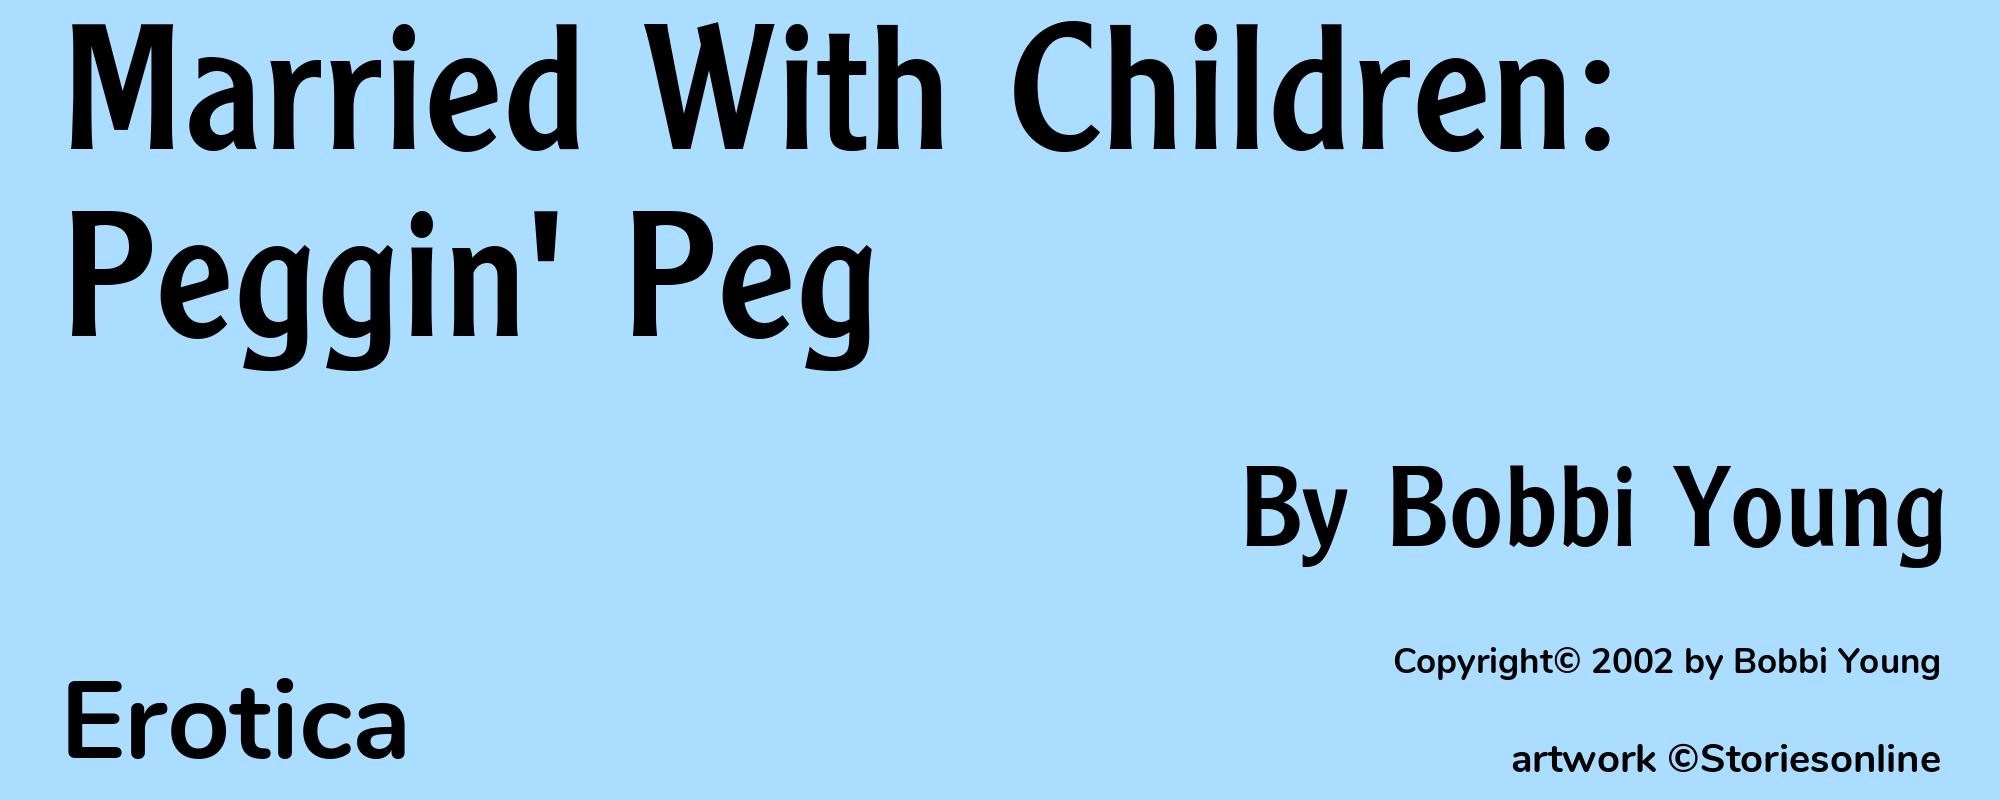 Married With Children: Peggin' Peg - Cover